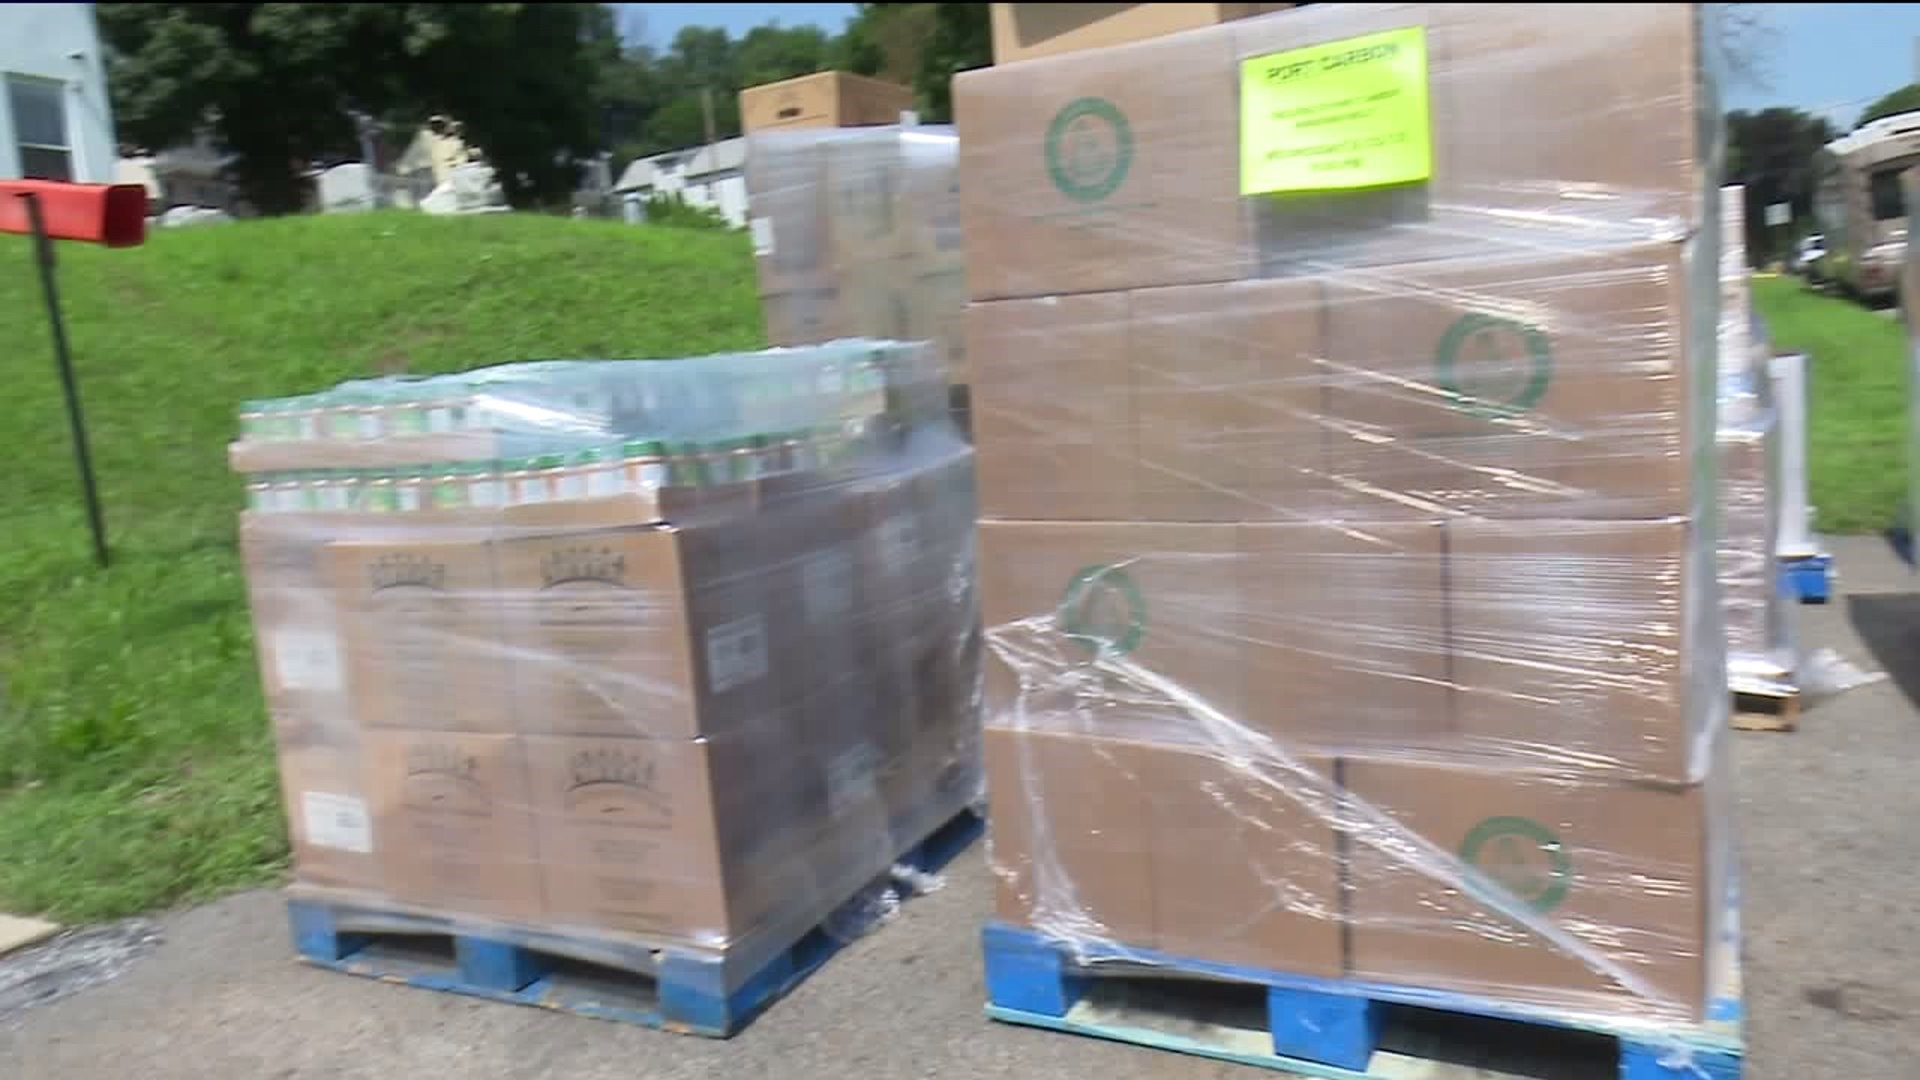 Food Donations Help Flood Victims in Port Carbon